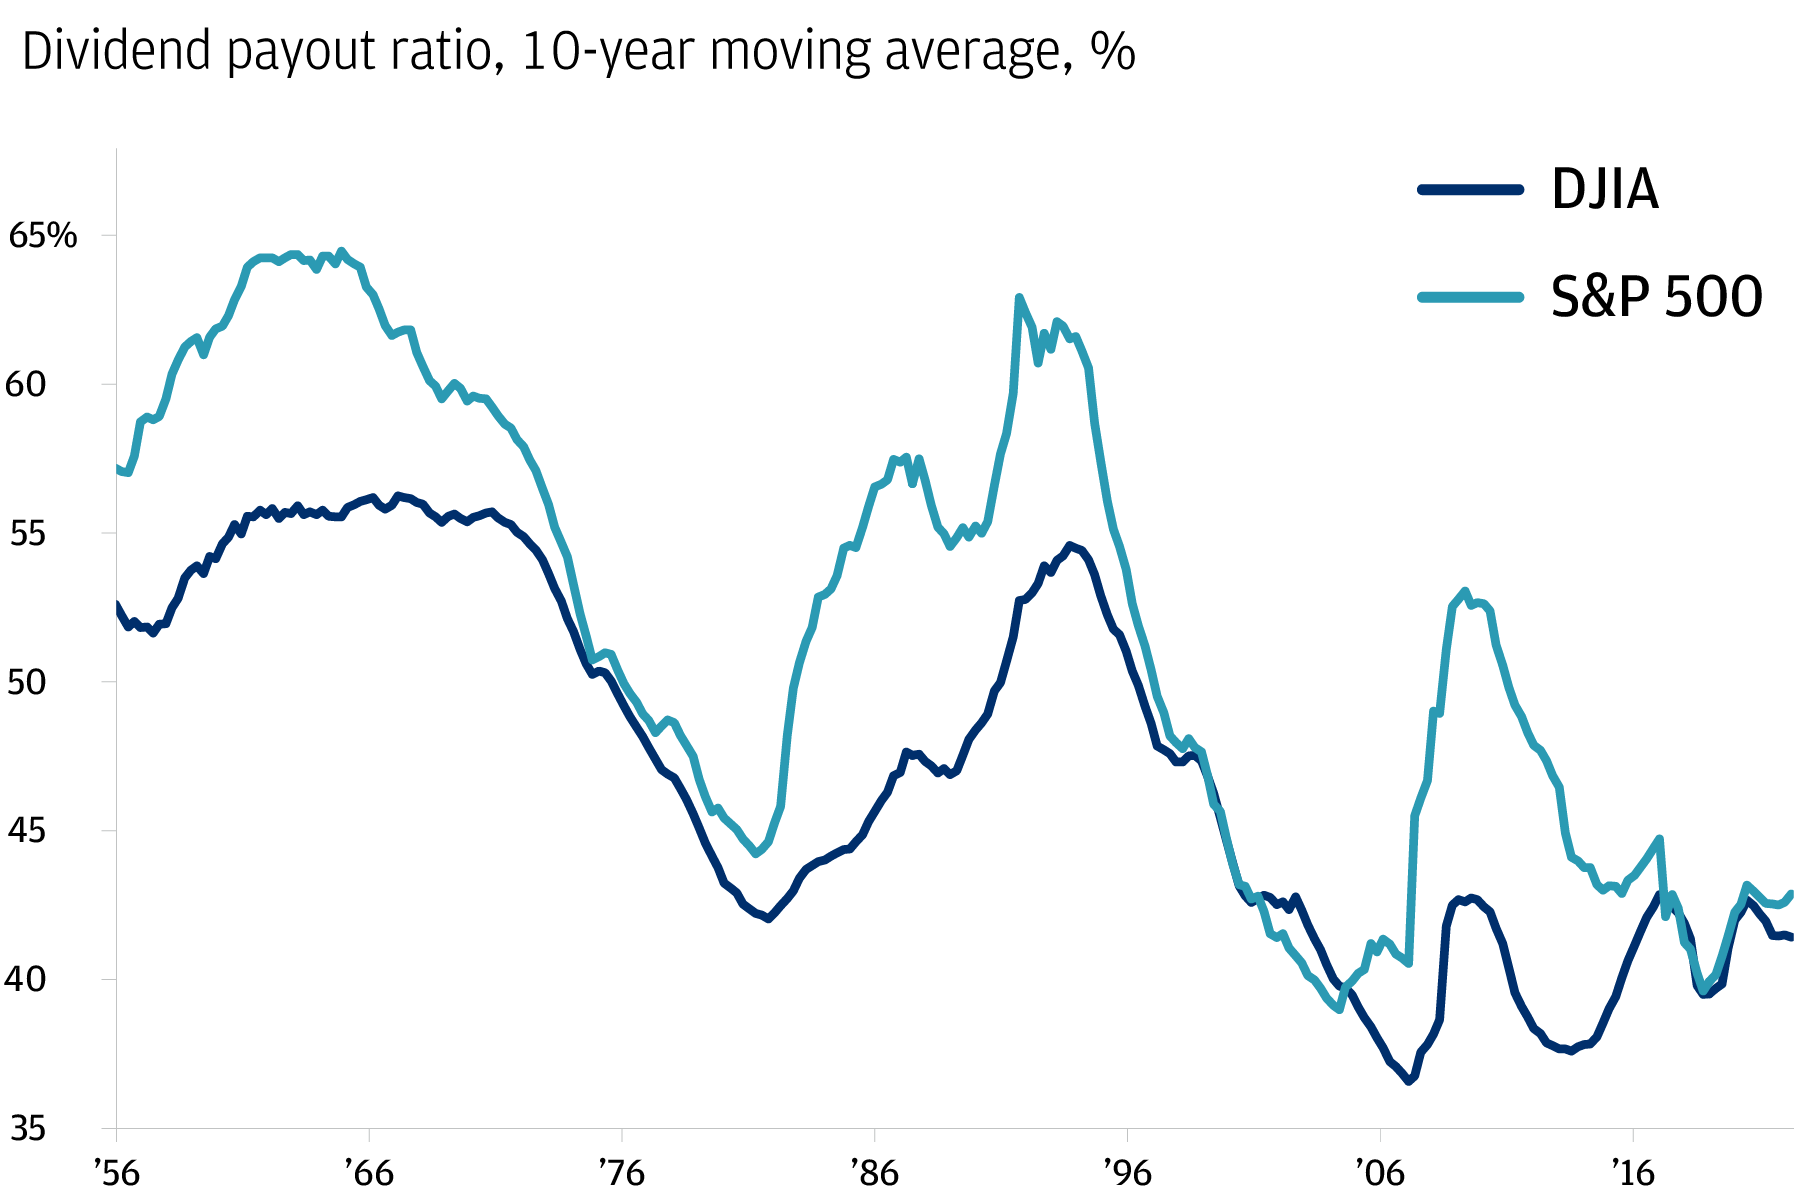 The chart shows the 10-year moving average of the dividend payout ratios of two indices, Dow Jones Industrial Average and S&P 500. 